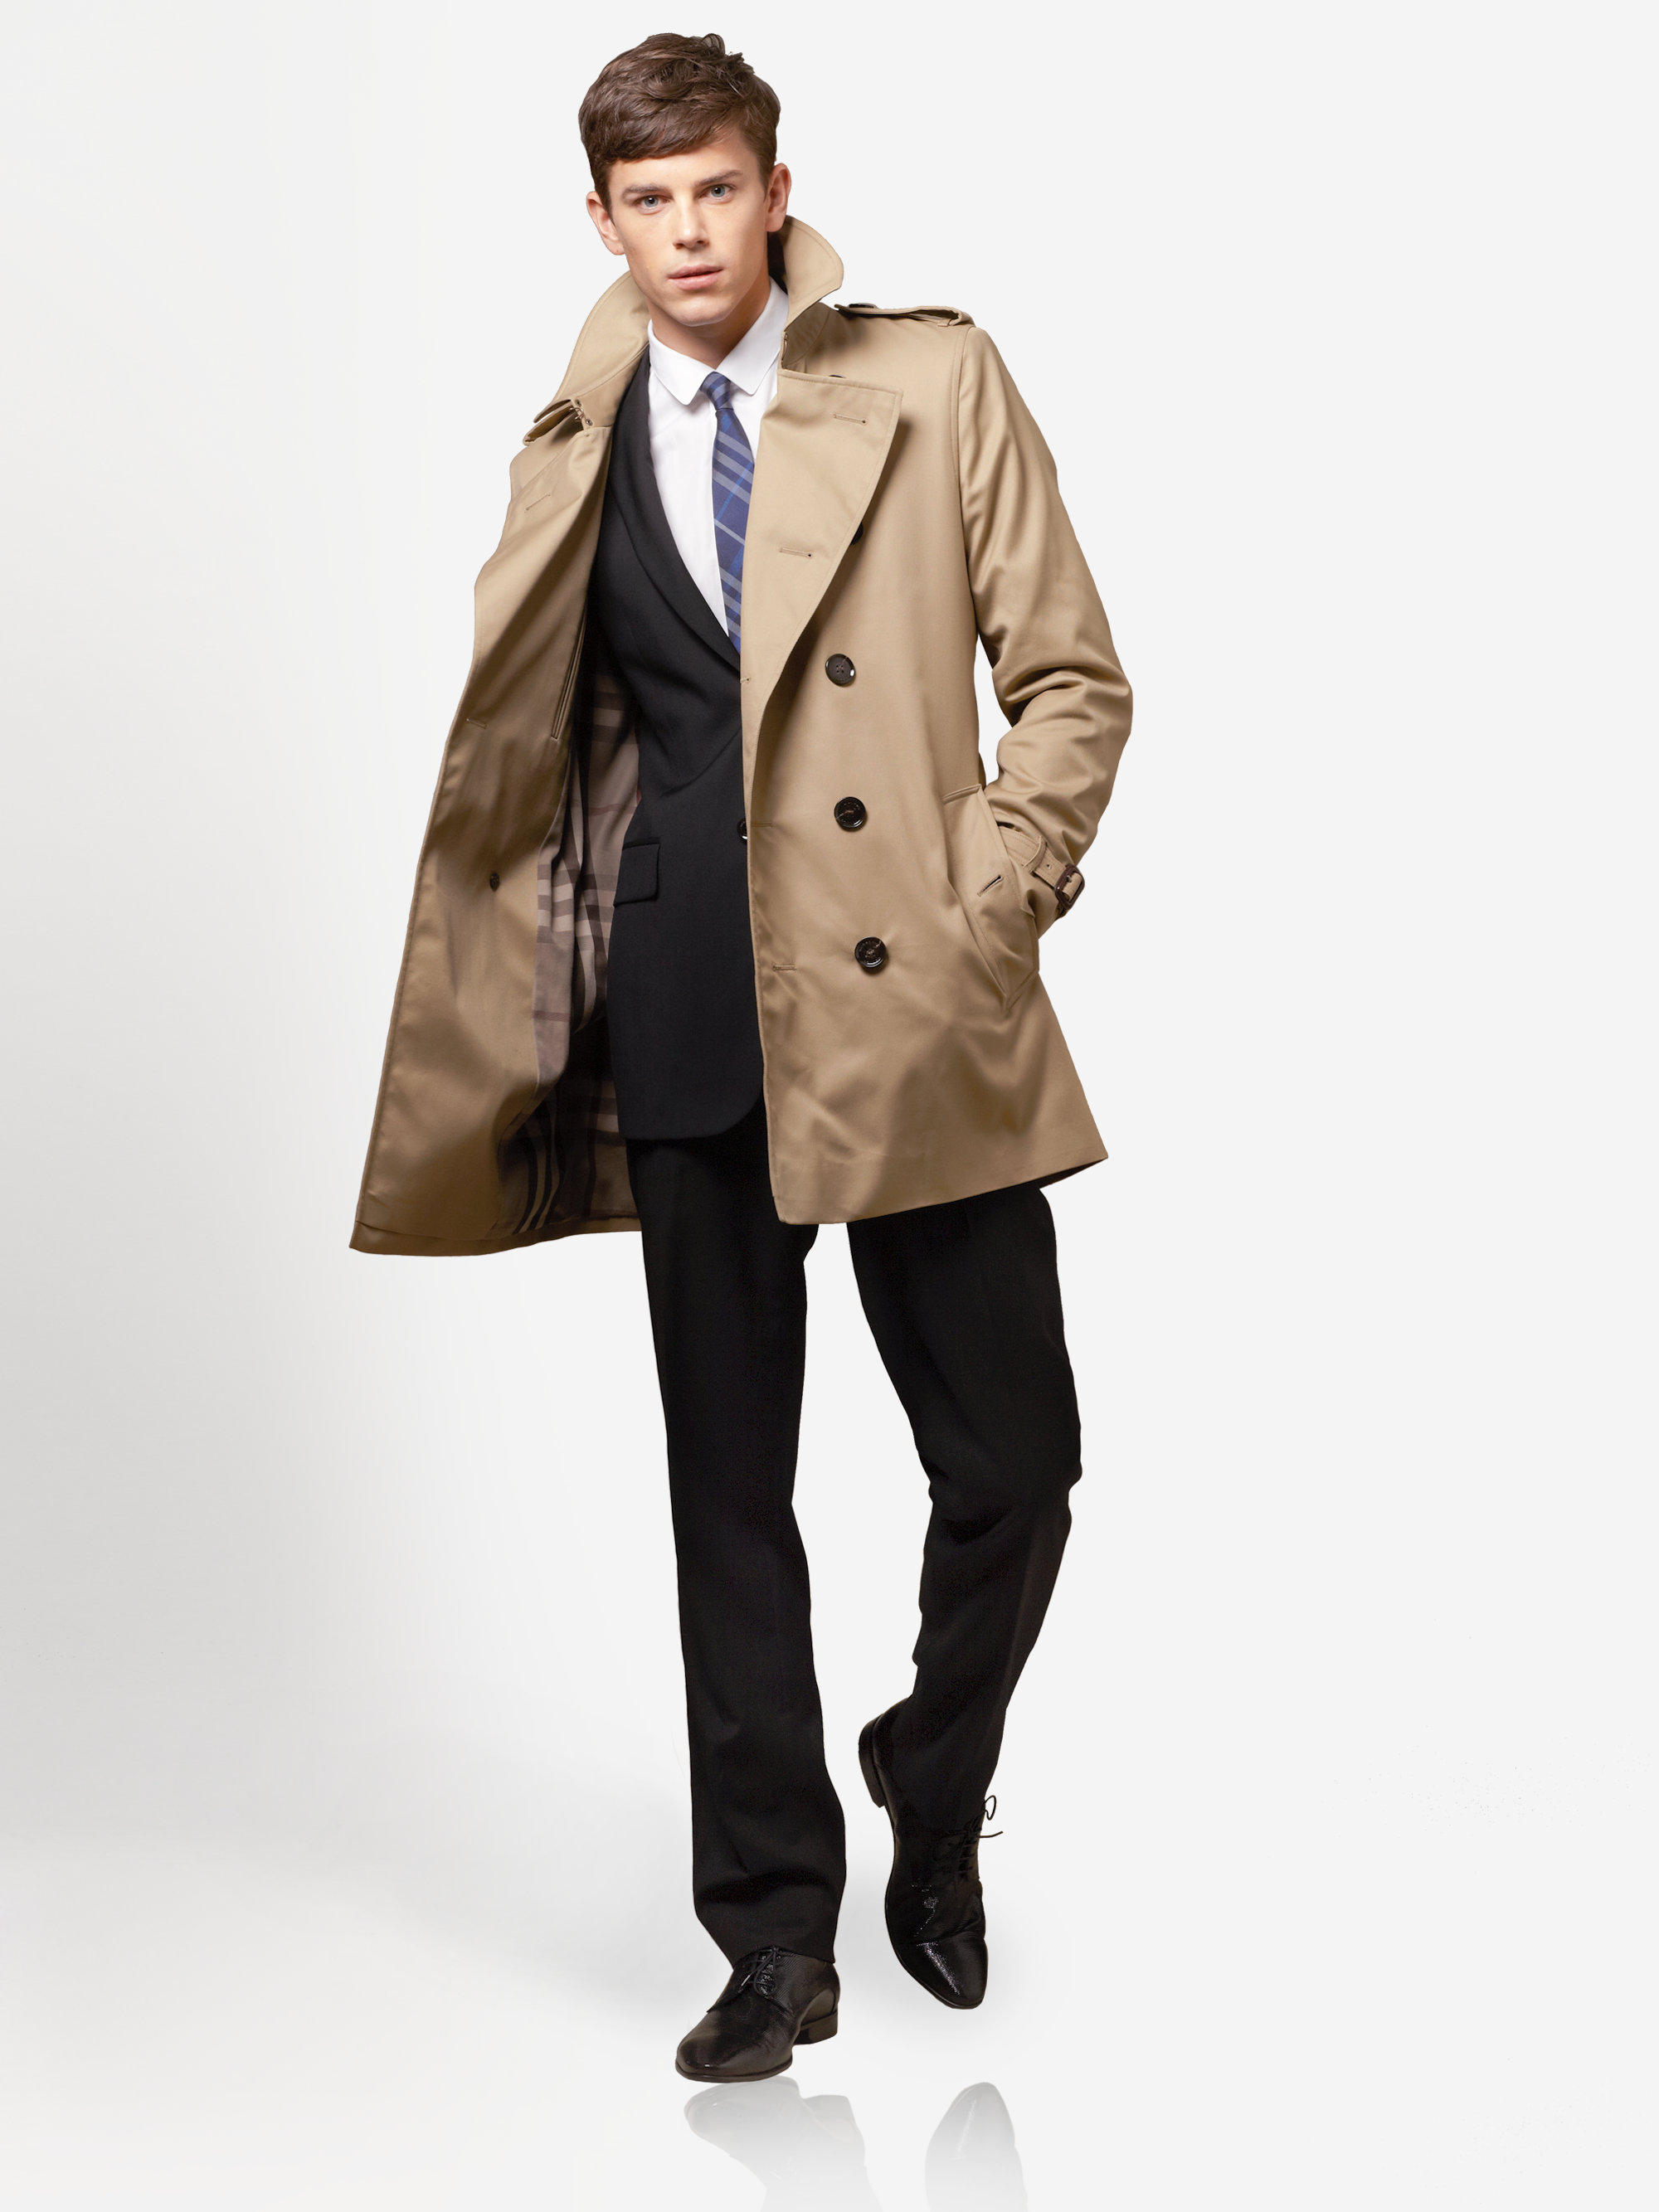 Burberry Britton Modernfit Trenchcoat in Natural for Men | Lyst